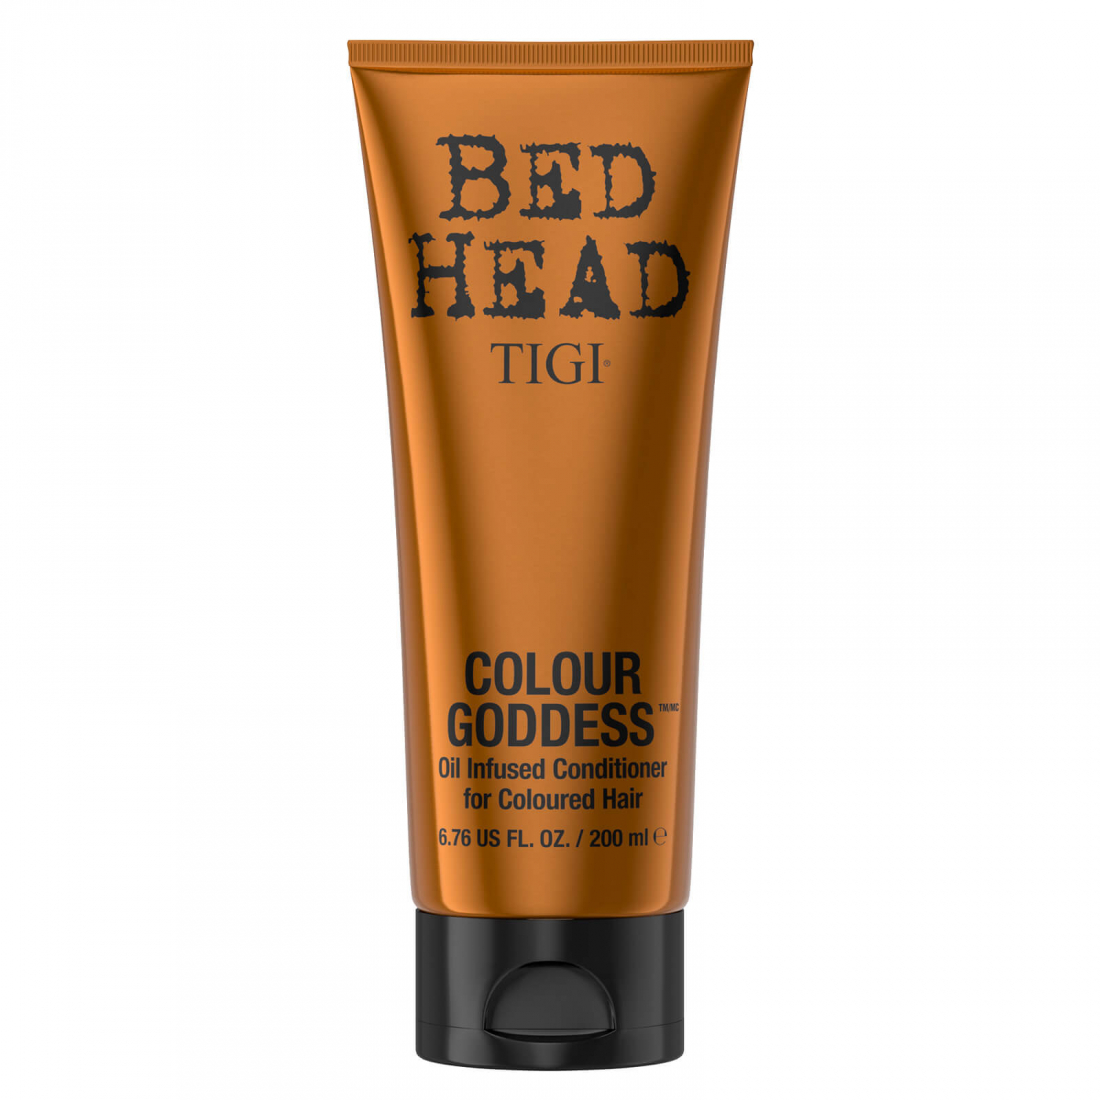 'Bed Head Colour Goddess Oil Infused' Conditioner - 200 ml